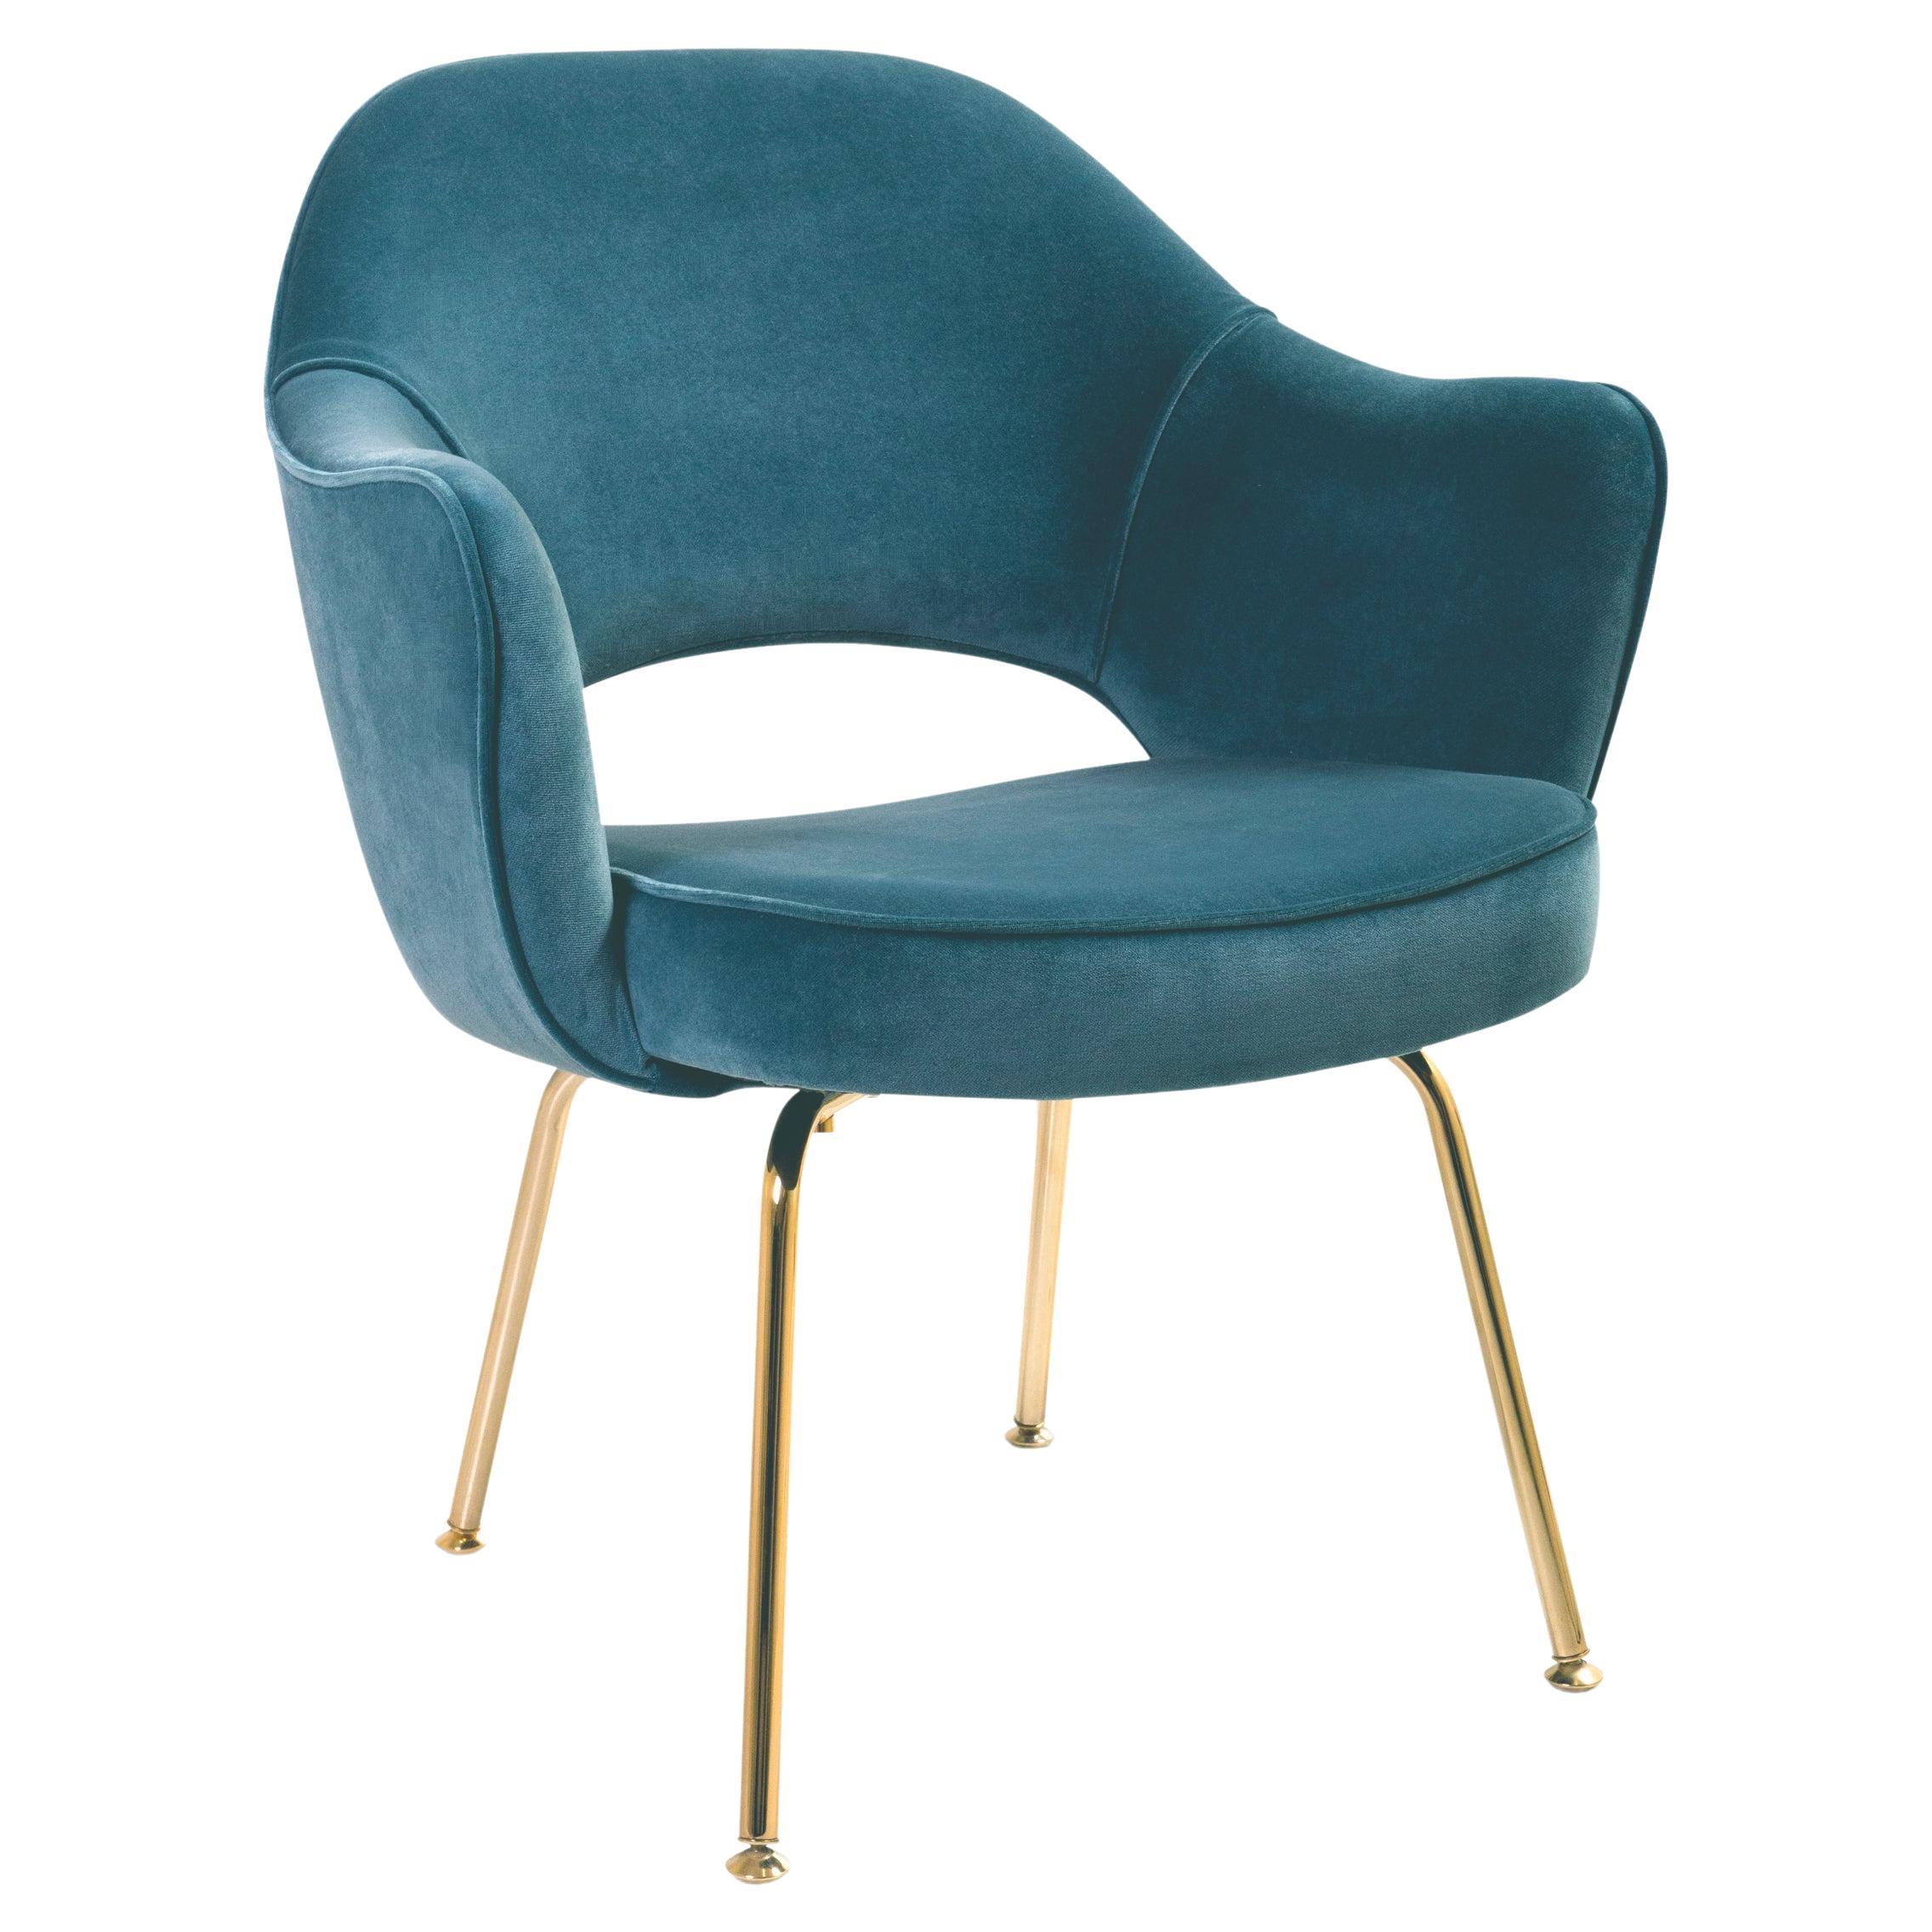 Mid-Century Modern Saarinen Executive Arm Chairs in Pavo Blue Velvet, Gold Edition, Pair For Sale